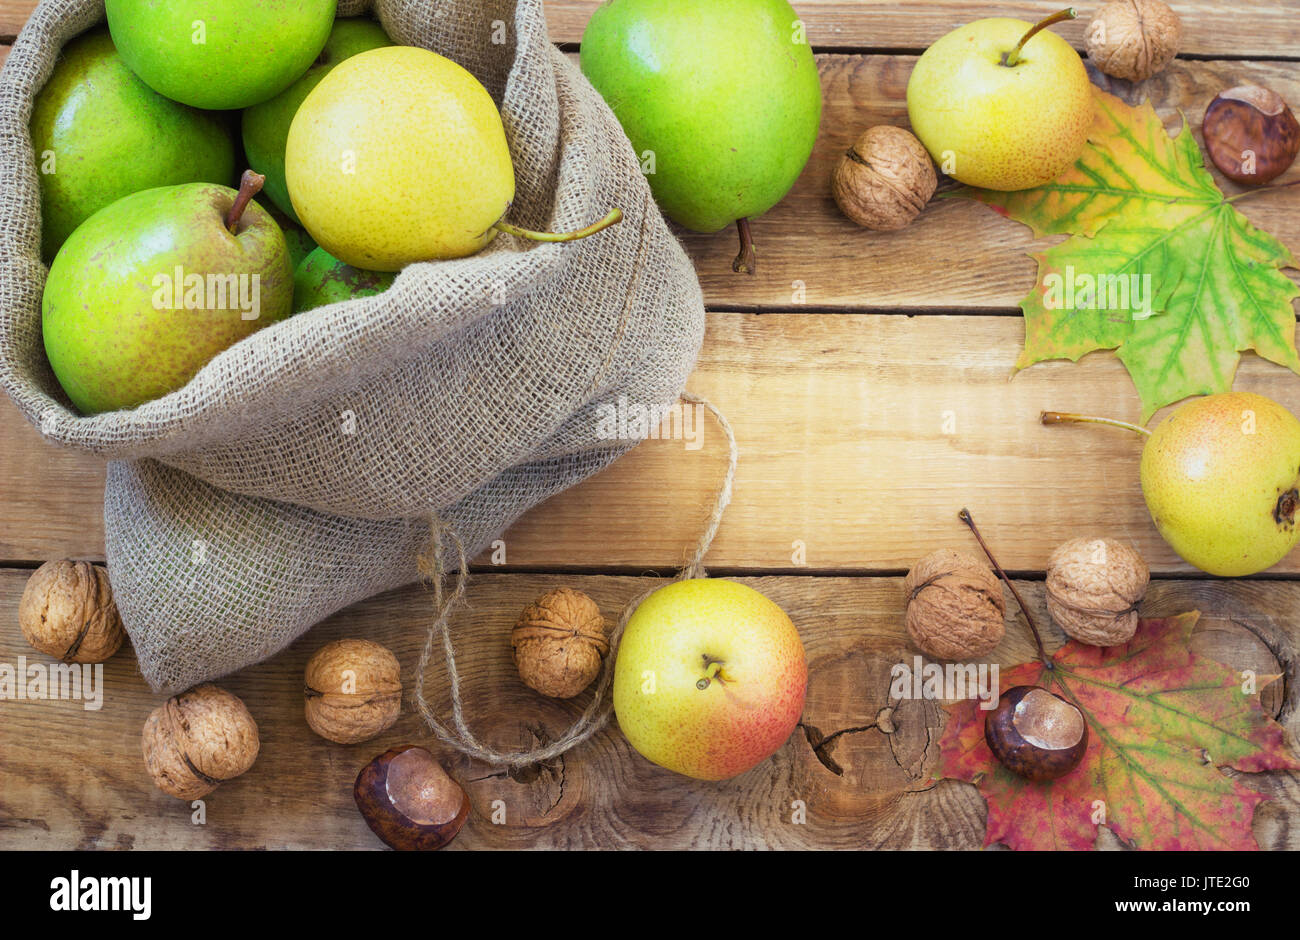 Autumn composition of fruits, nuts and spices - pears, walnuts, maple leaves on a wooden background Stock Photo